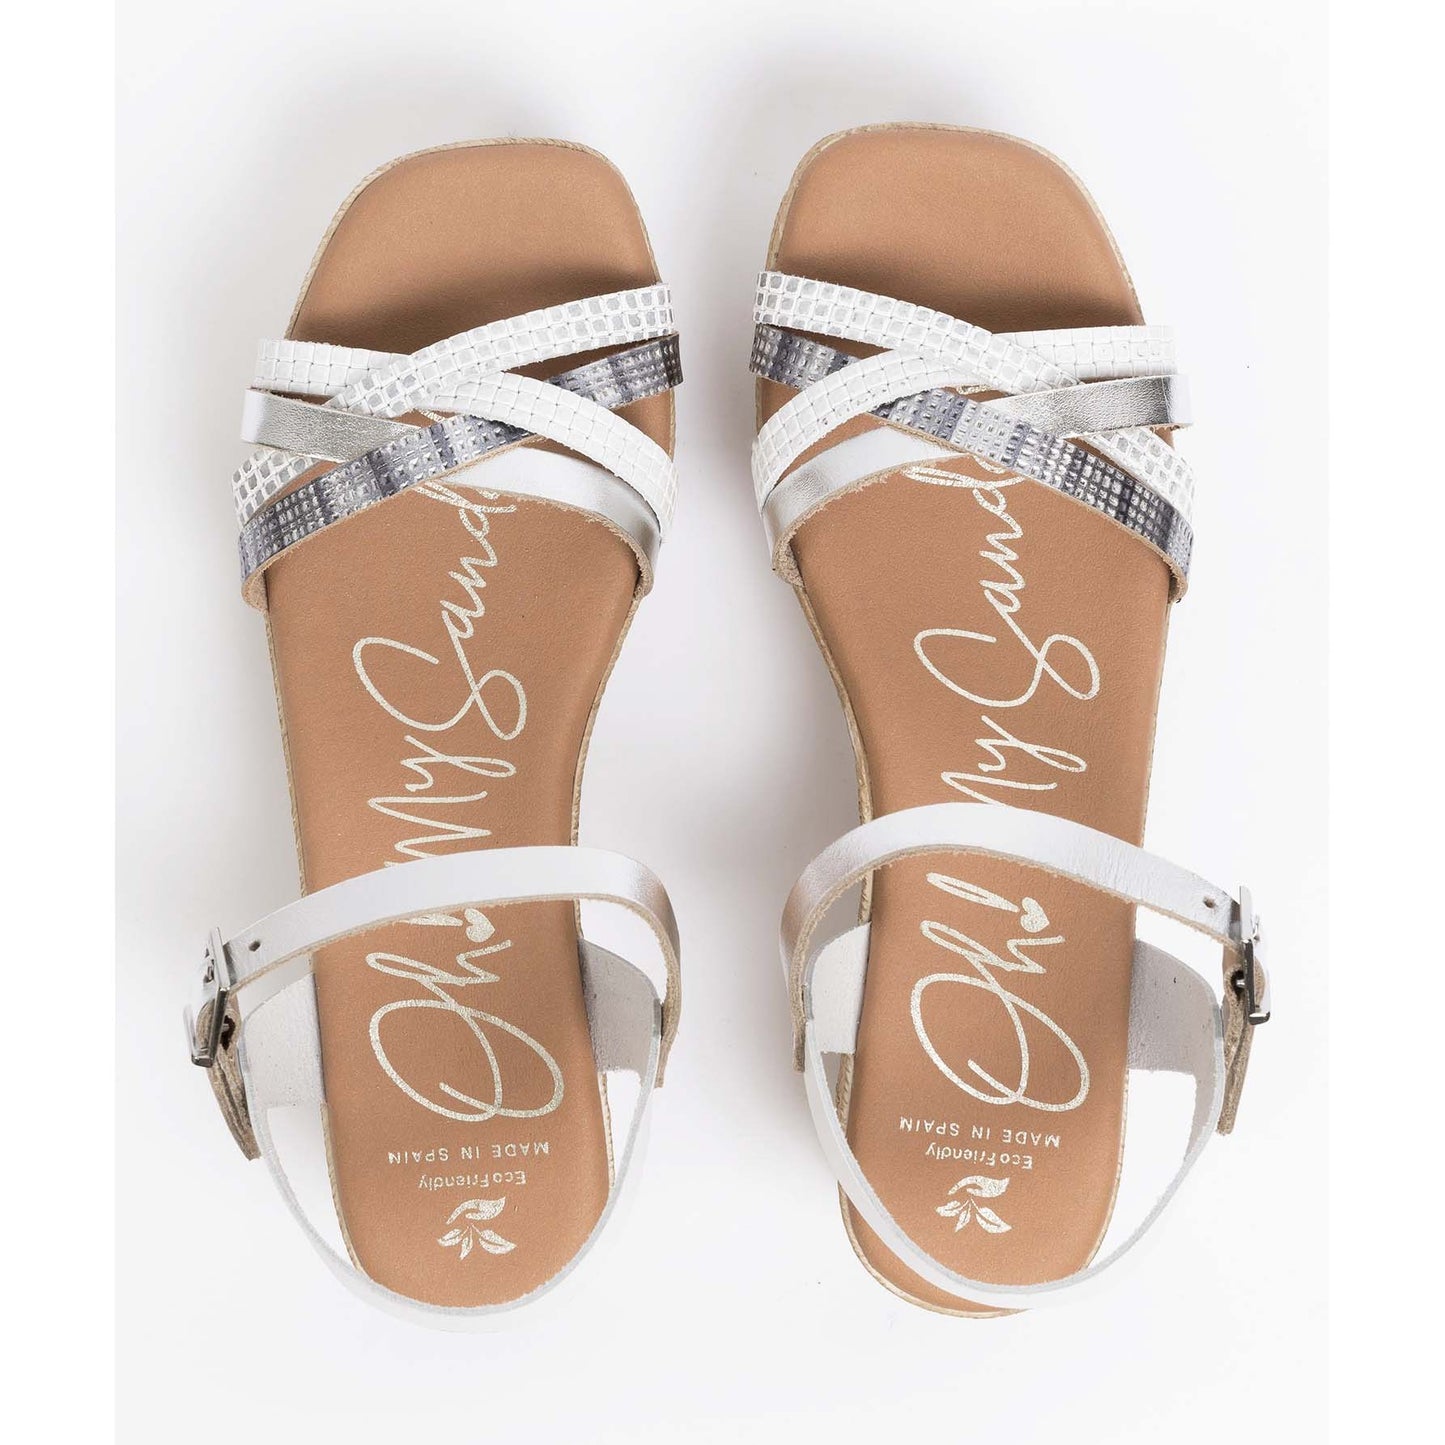 Oh My Sandals Sandali Bianco in pelle Made in Spagna